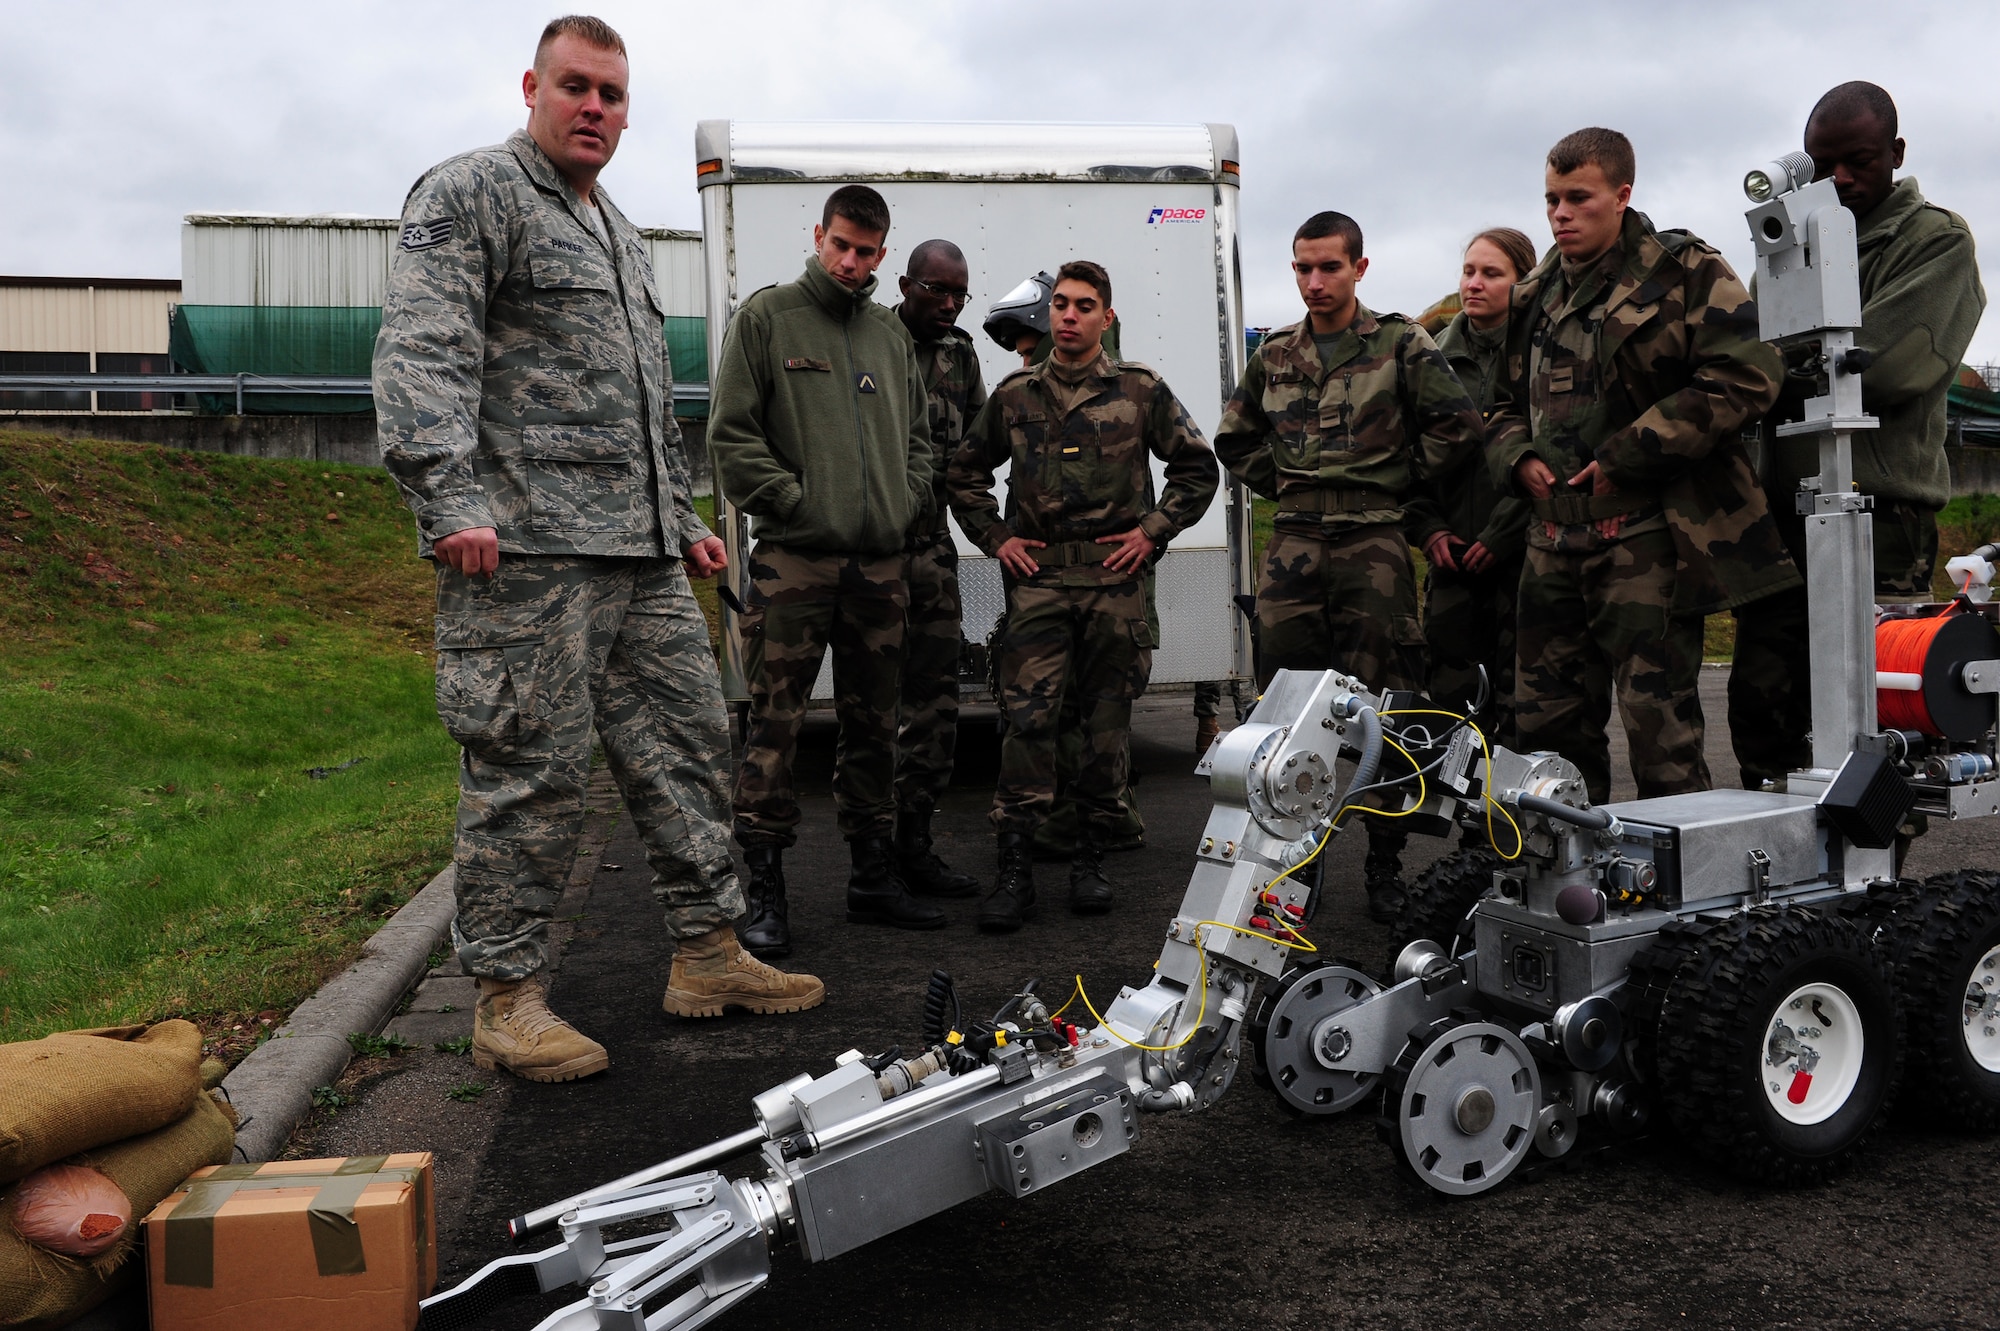 U.S. Air Force Staff Sgt. Kristopher Parker, 886th Civil Engineer Squadron, briefs French air force cadets on particulars of the F6A robot, Ramstein Air Base, Germany, Nov. 16, 2010. The cadets will be visiting several locations on base during the tour.(U.S. Air Force photo by Airman 1st Class Brea Miller)